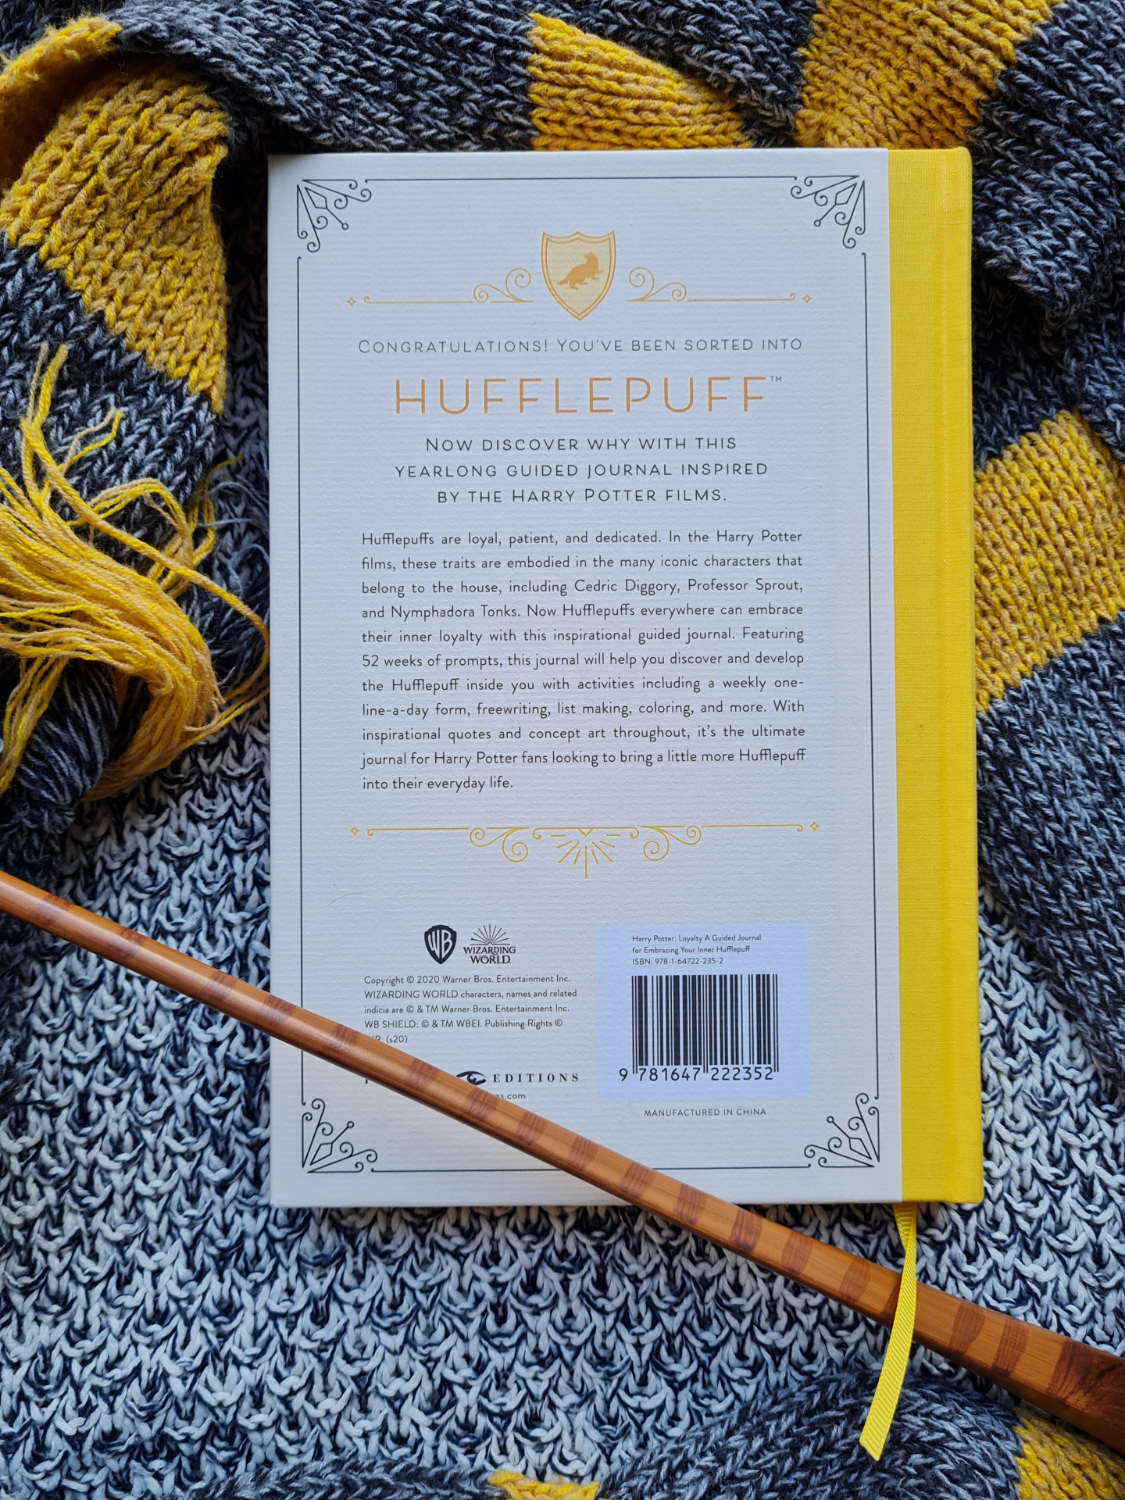 Back cover of “Loyalty: A Guided Journal for Embracing Your Inner Hufflepuff” from Insight Editions